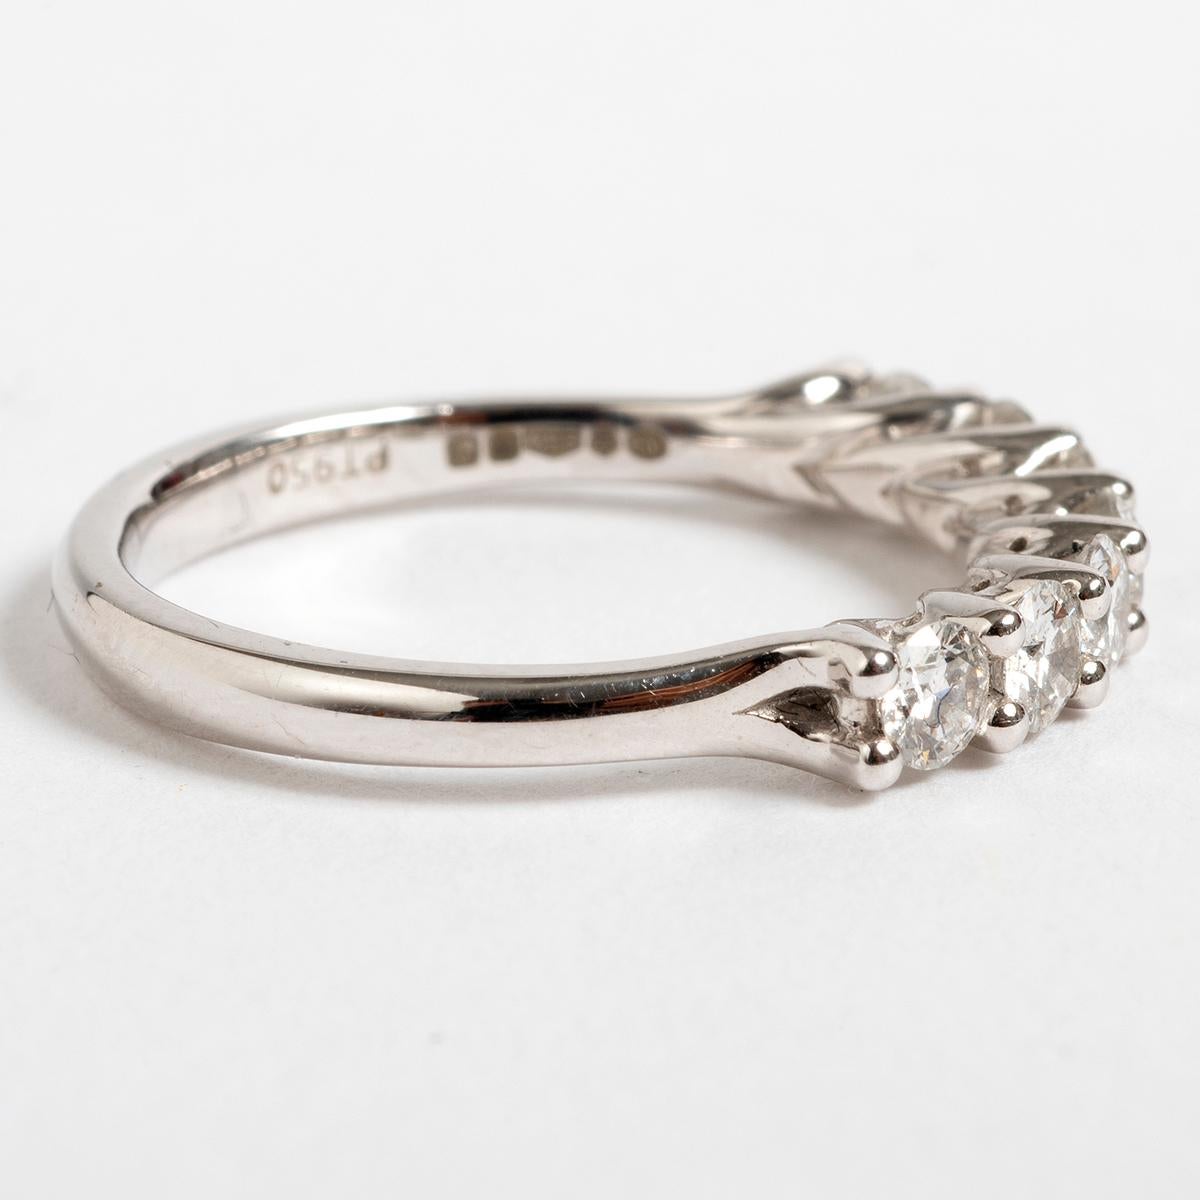 This pretty diamond 1/2 eternity ring is set with 7 stone claw in platinum. Total approx 0.70carat. This ring is a UK size M and US size 6.5.